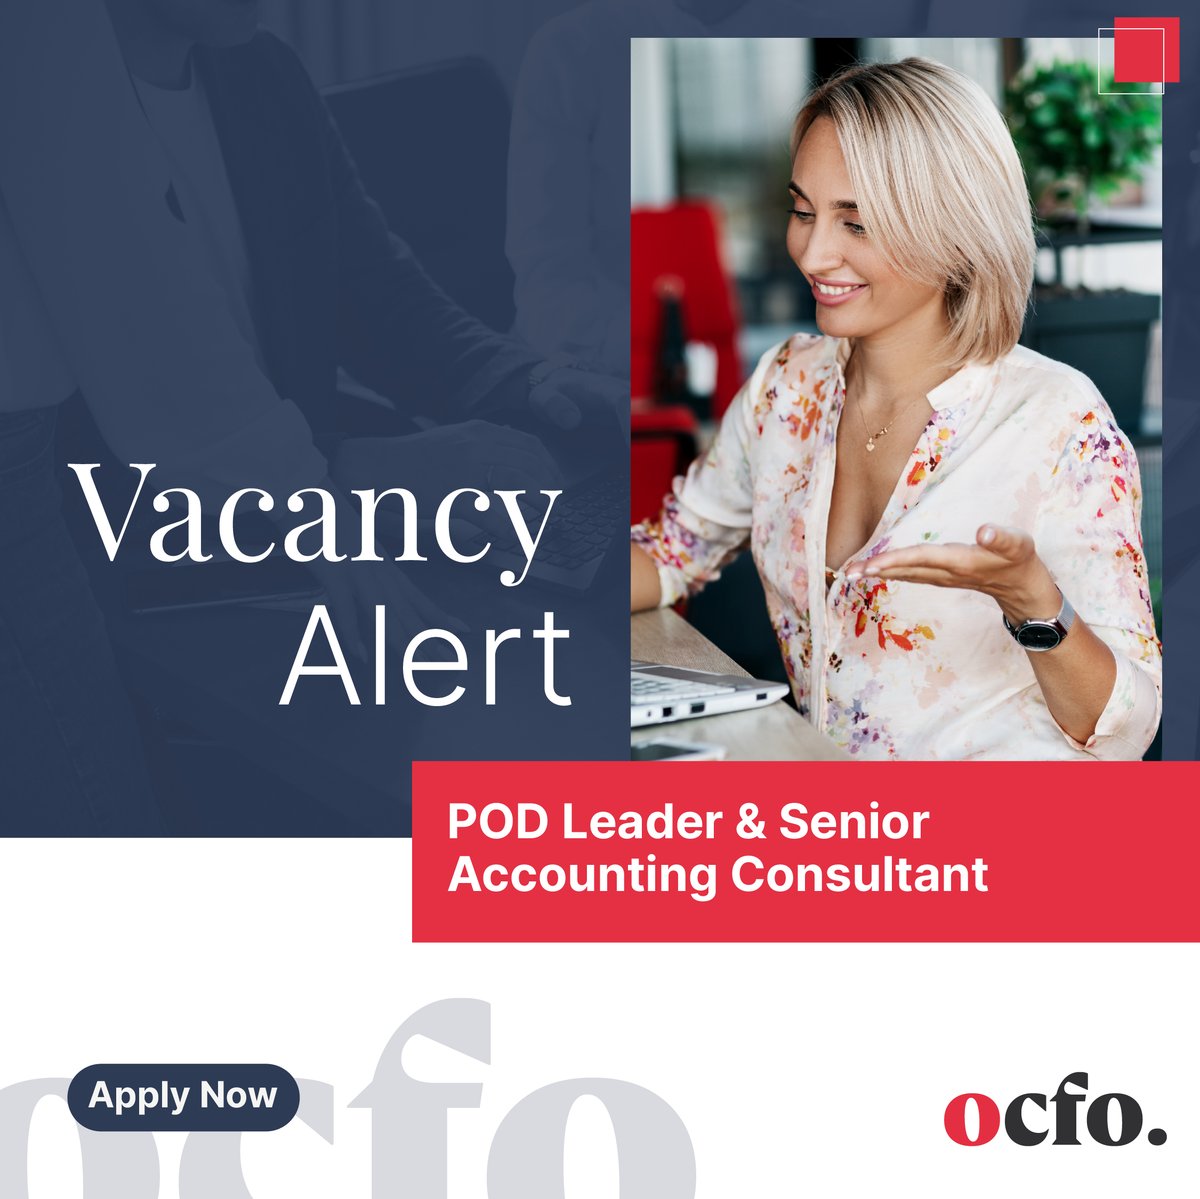 POD Leader & Snr Accounting Consultant

Responsibilities include processing  financial transactions, client engagement, compiling financial statements & management.
Read more: bit.ly/3T5fHrq
Apply:  bit.ly/43TgpdC

#ocfo #cloudaccounting #wearehiring #consulting